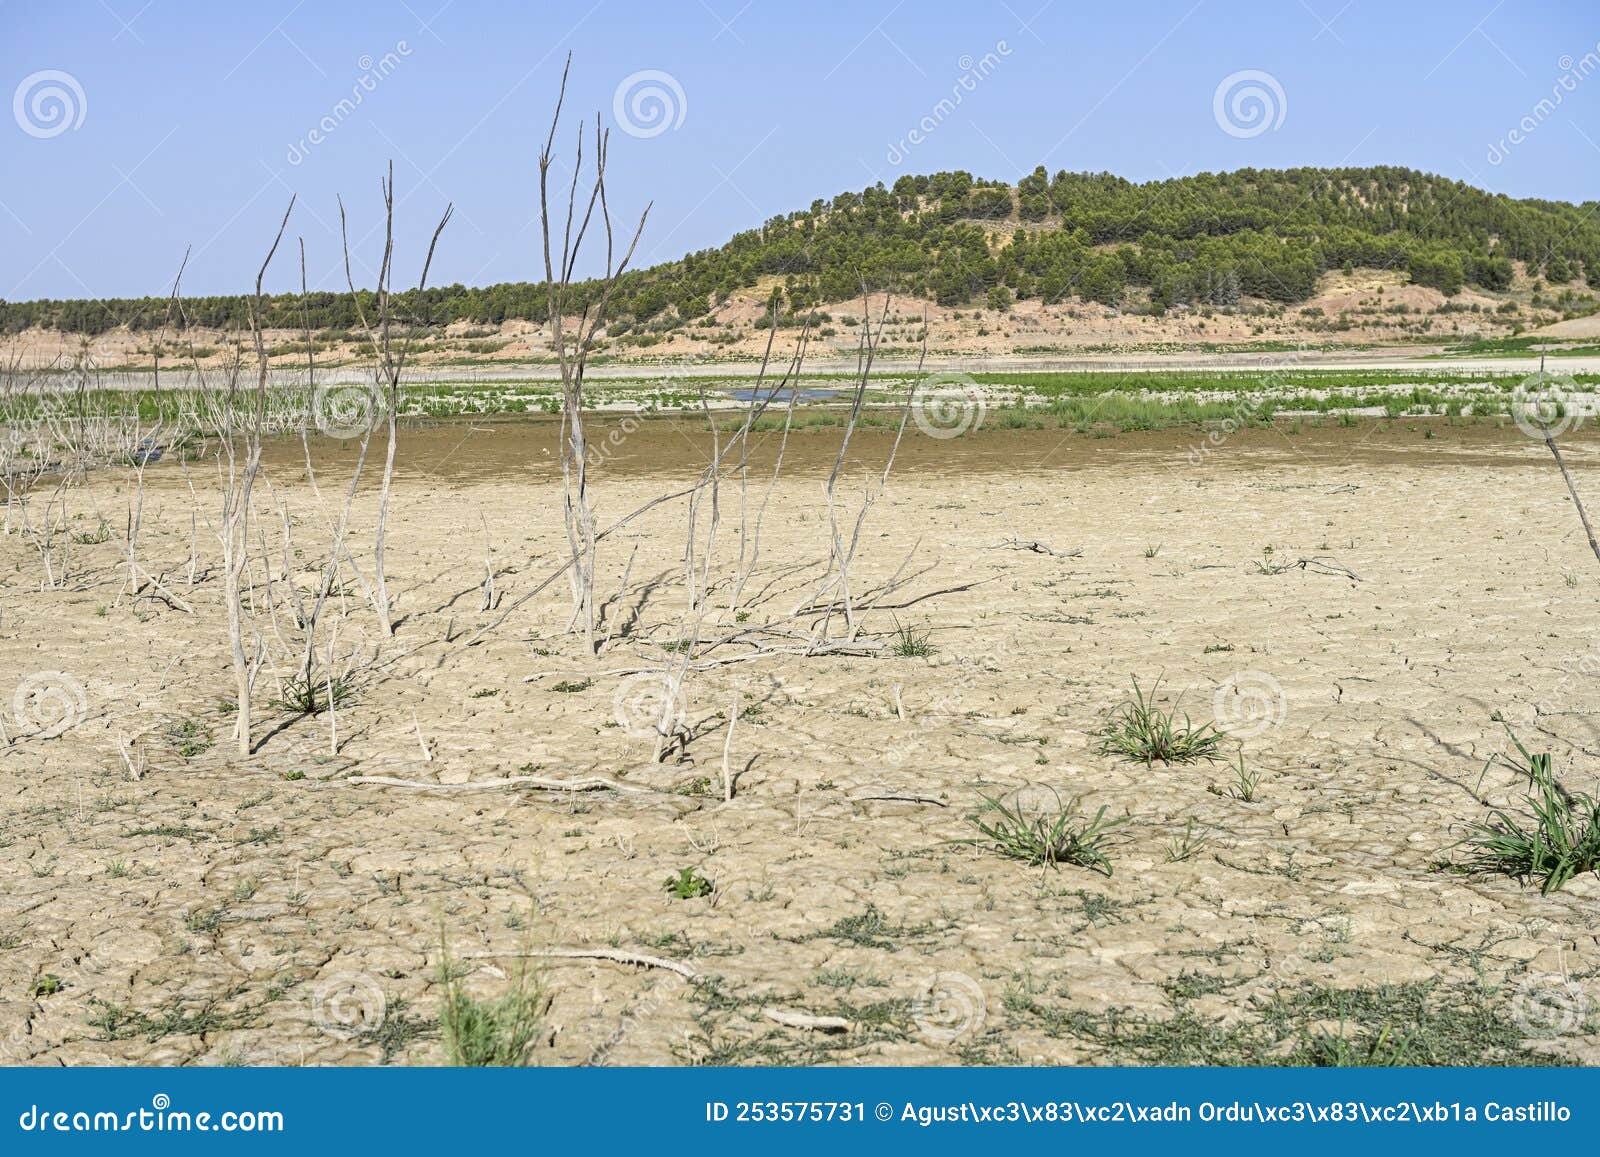 texture of dry land in southern europe. global warming and greenhouse effect.